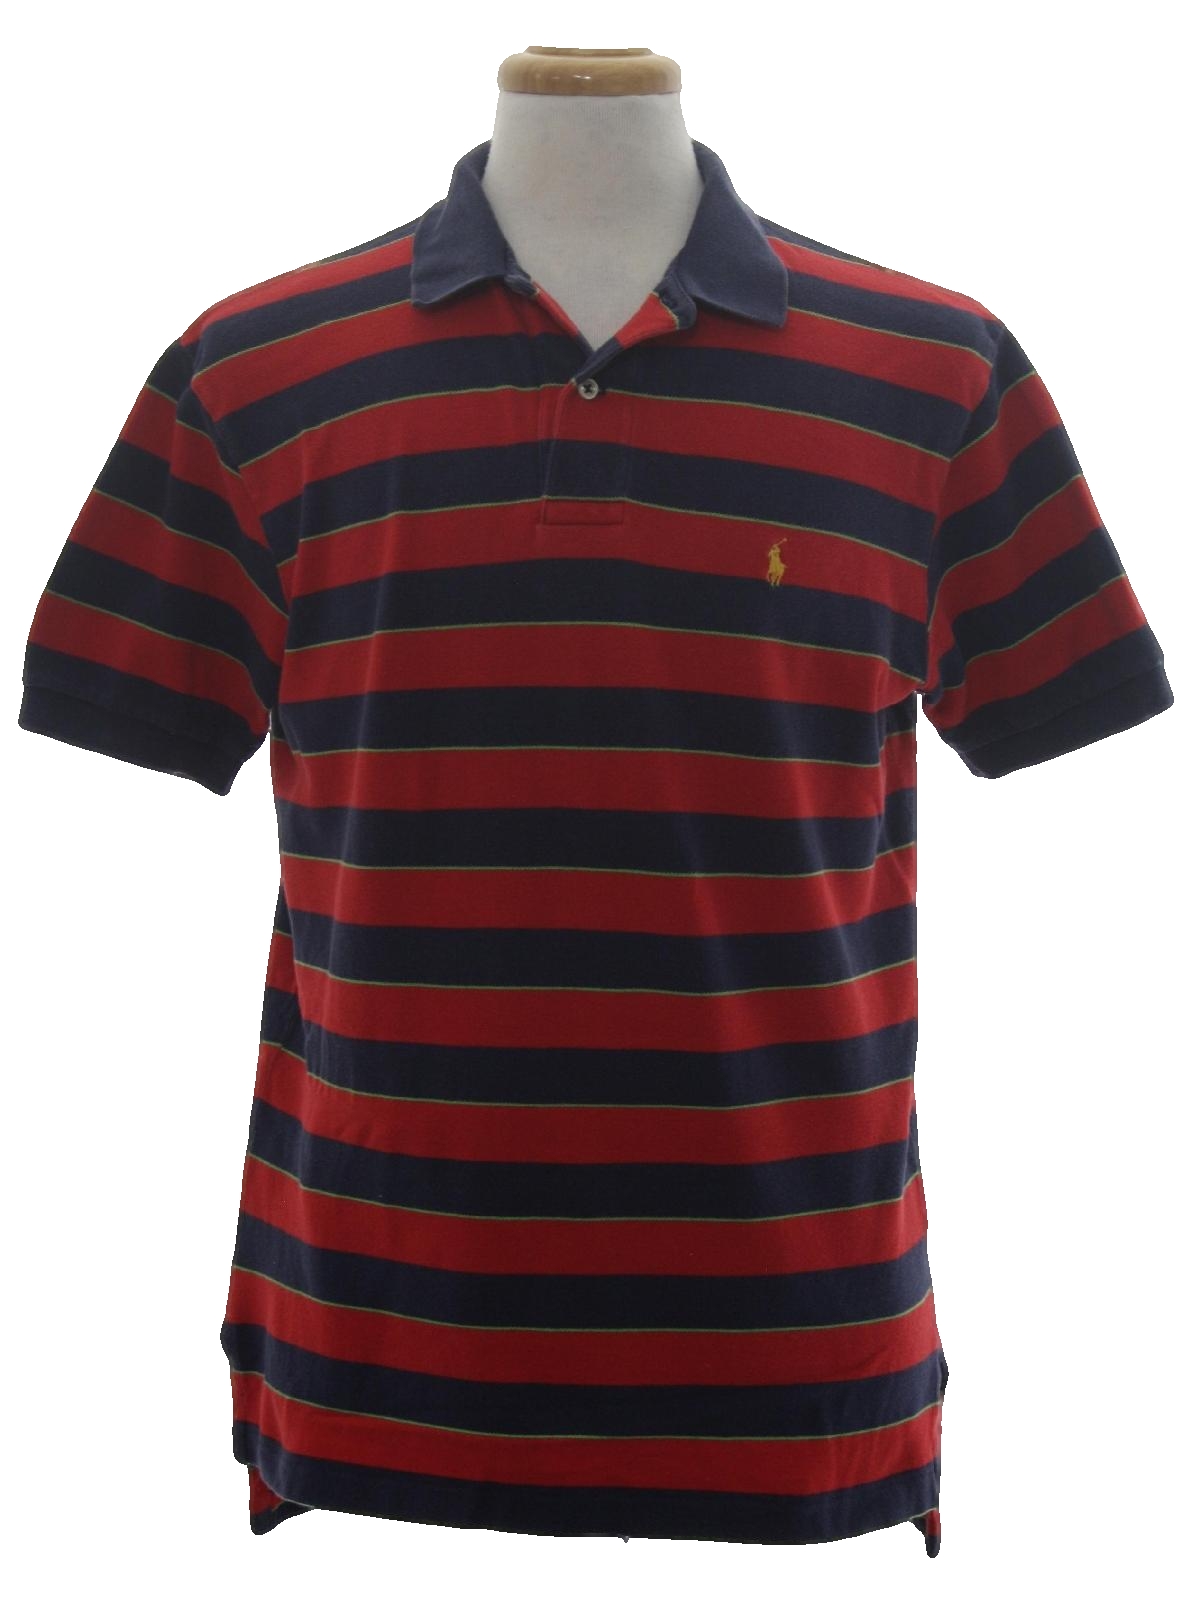 Download 1990's Vintage Polo by Ralph Lauren Shirt: 90s -Polo by ...